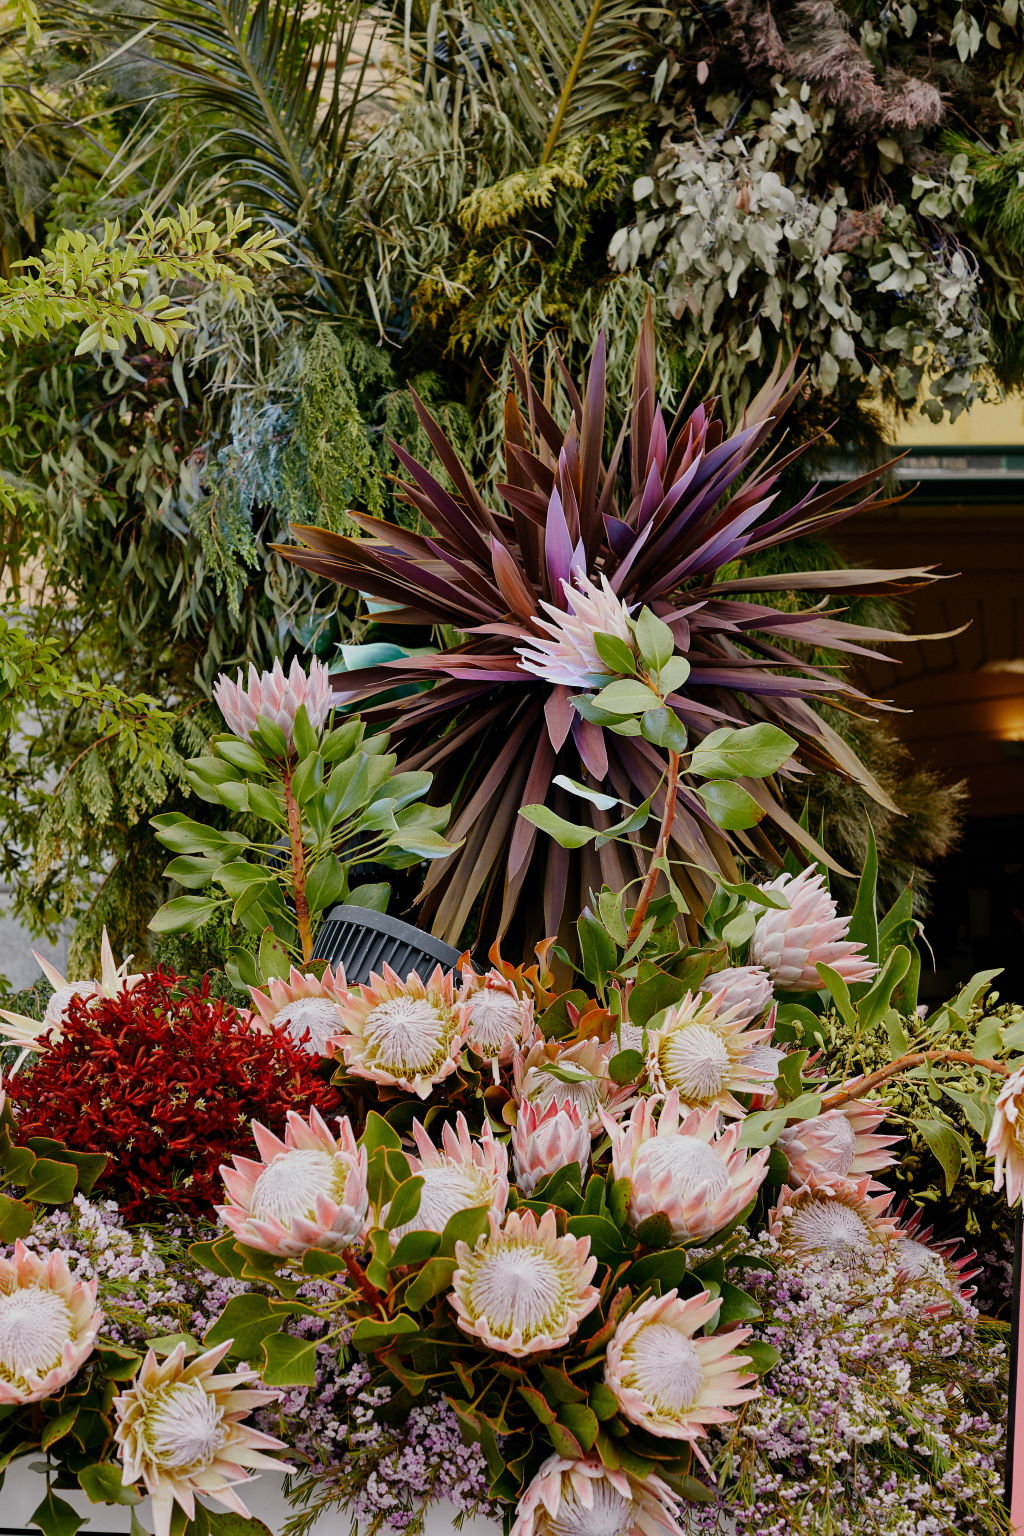 The garden base of the arch at Flinders Street Station, by Flowers Vasette, comprises banksia, kangaroo paw, king protea and towering three-metre tall Acer maple plants. Photo: Amelia Stanwix Photography.